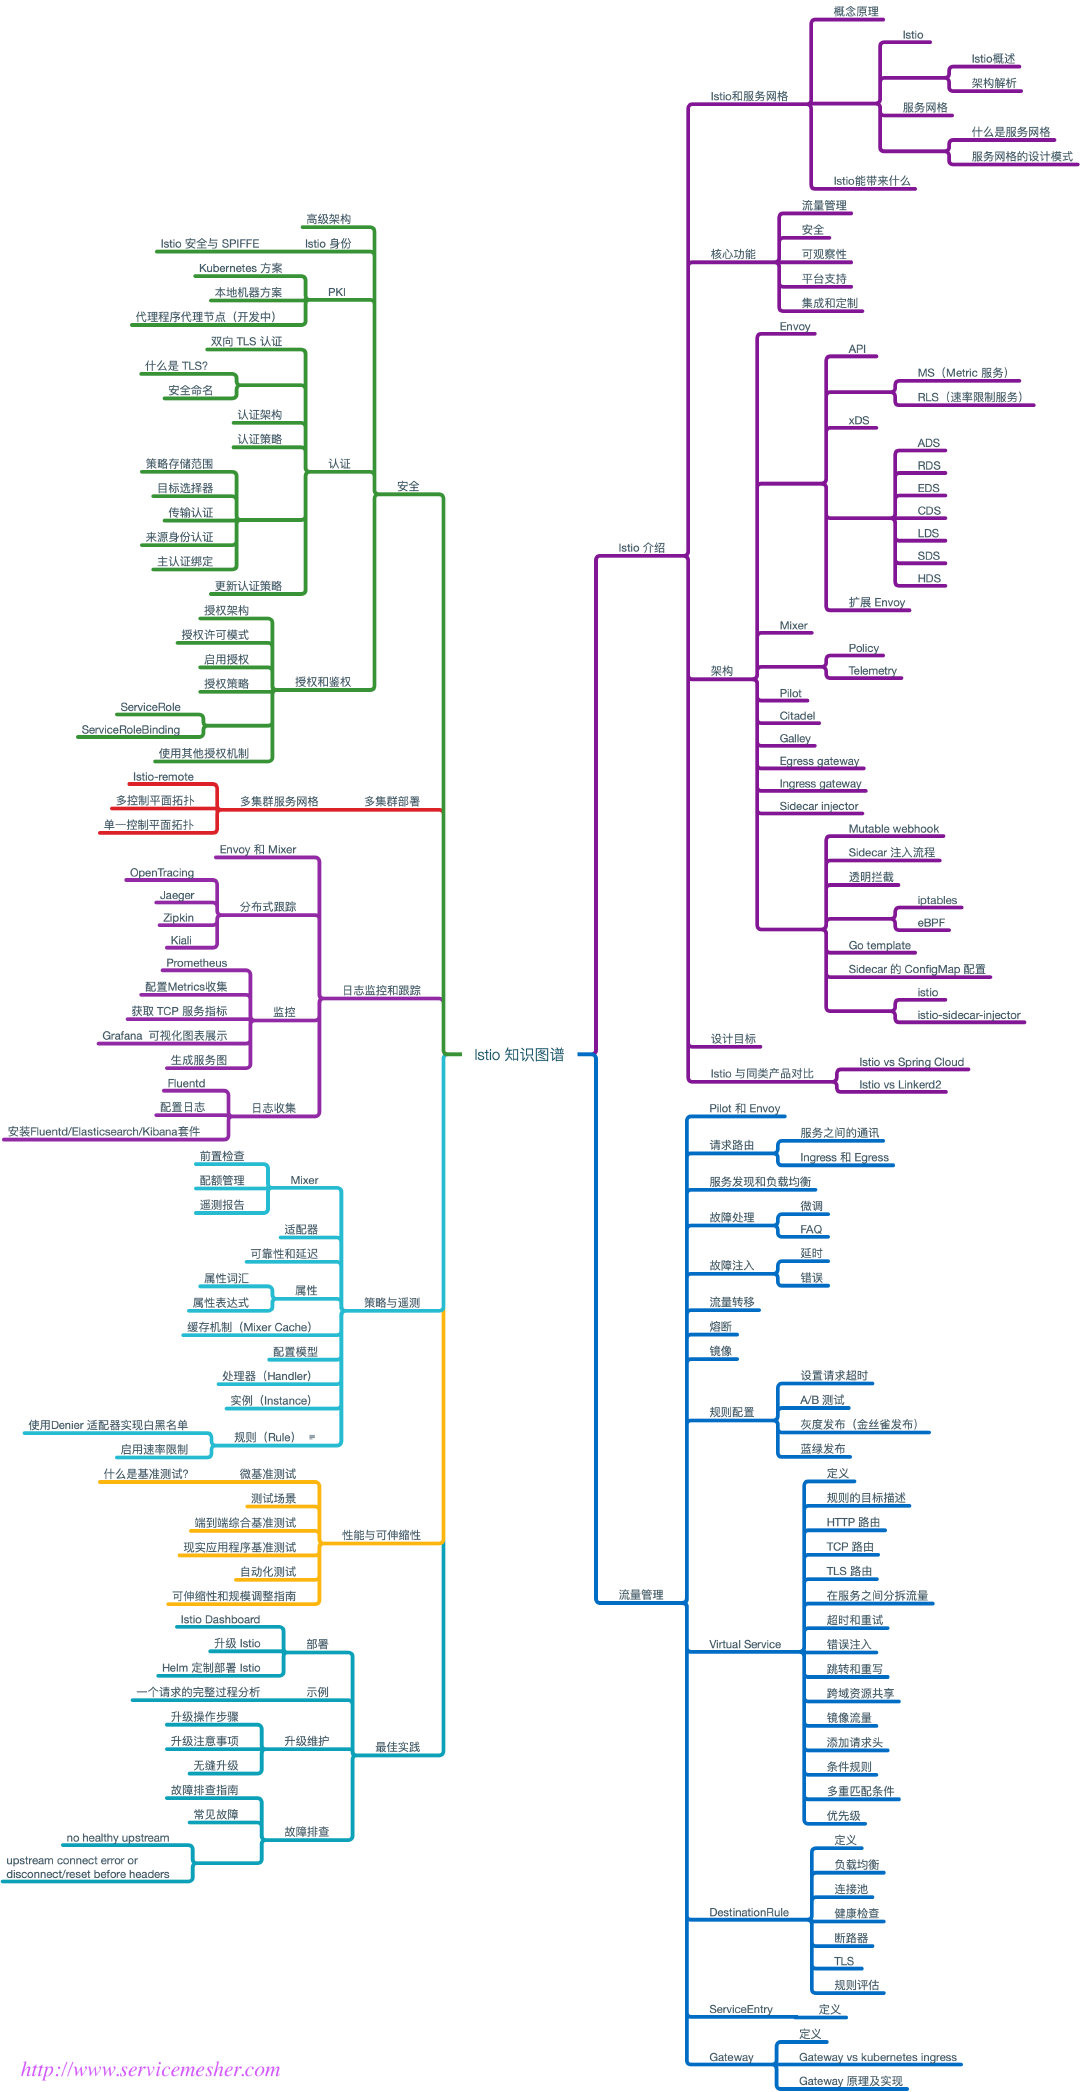 Istio knowledge map